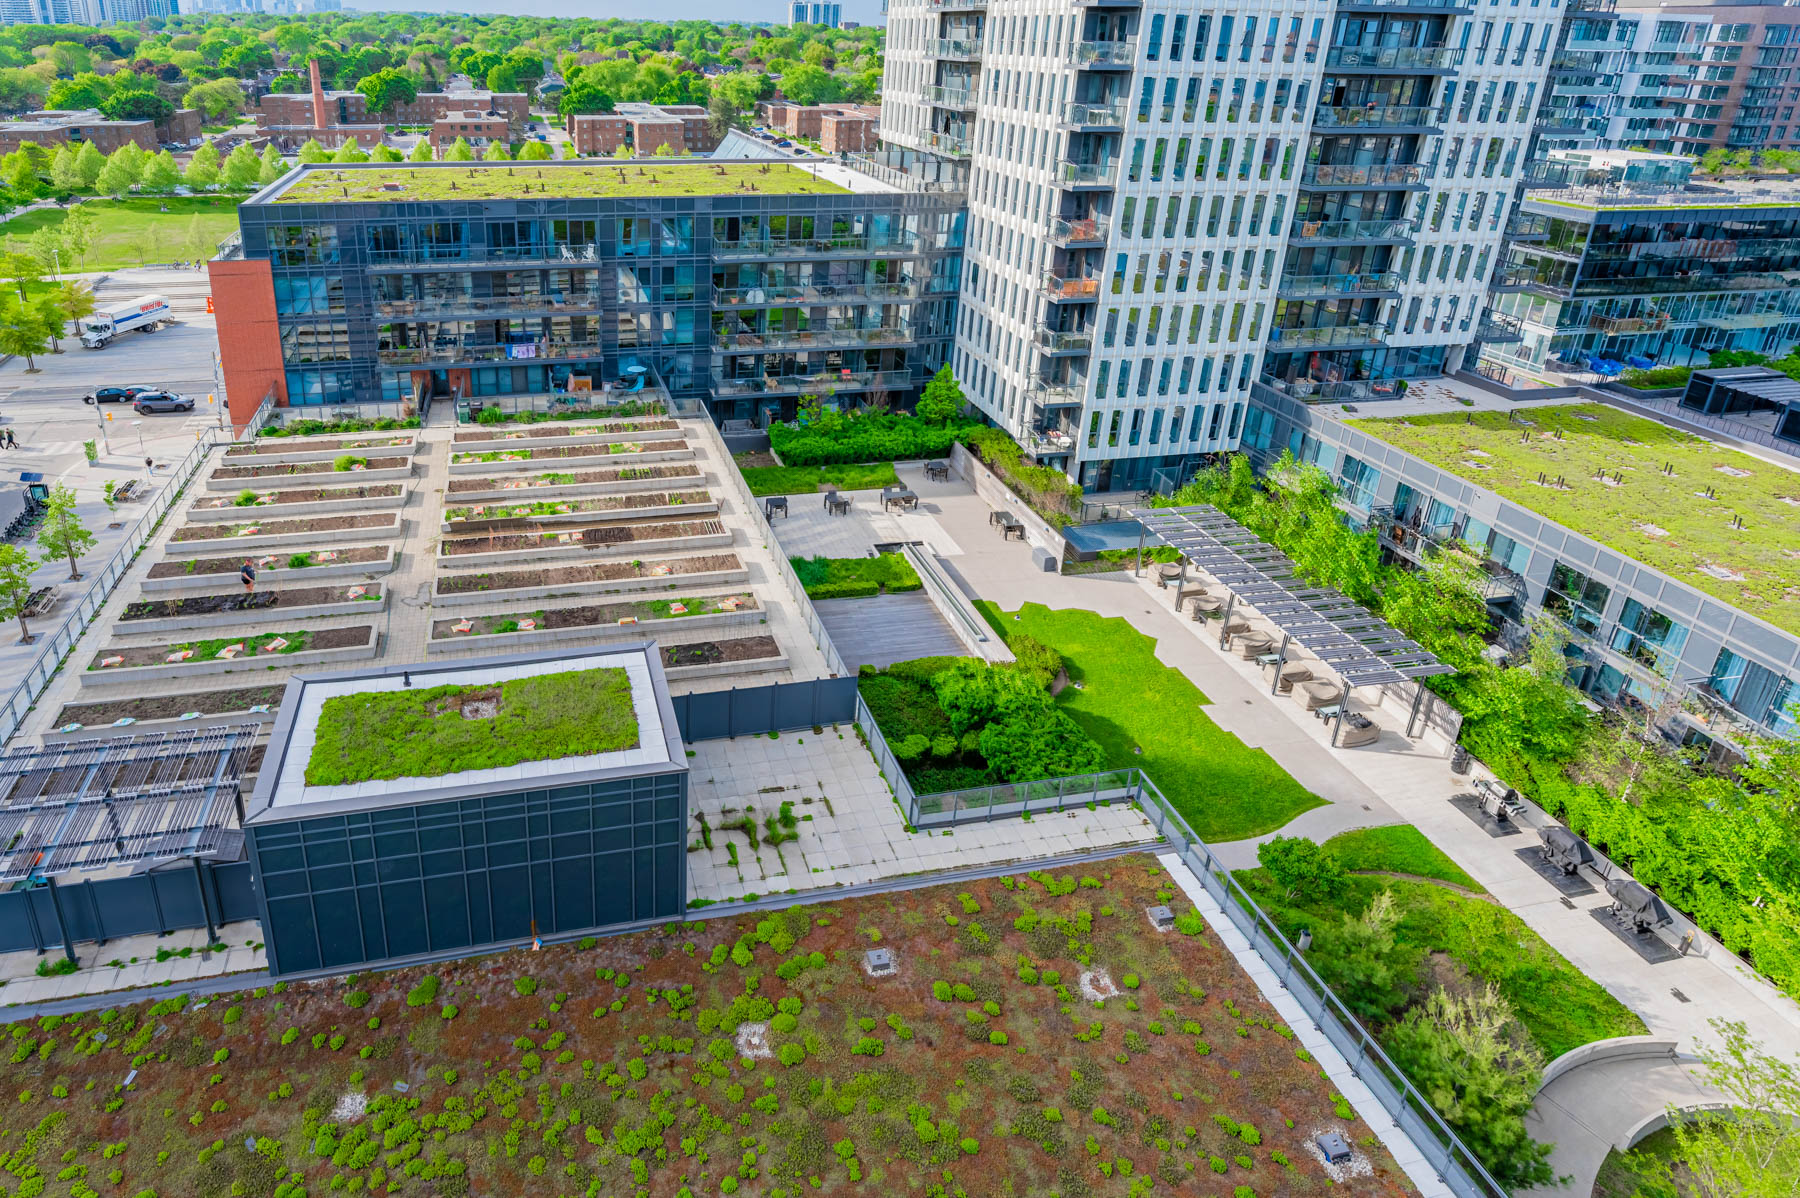 Condo with rooftop gardens and landscaped terraces – One Park Place